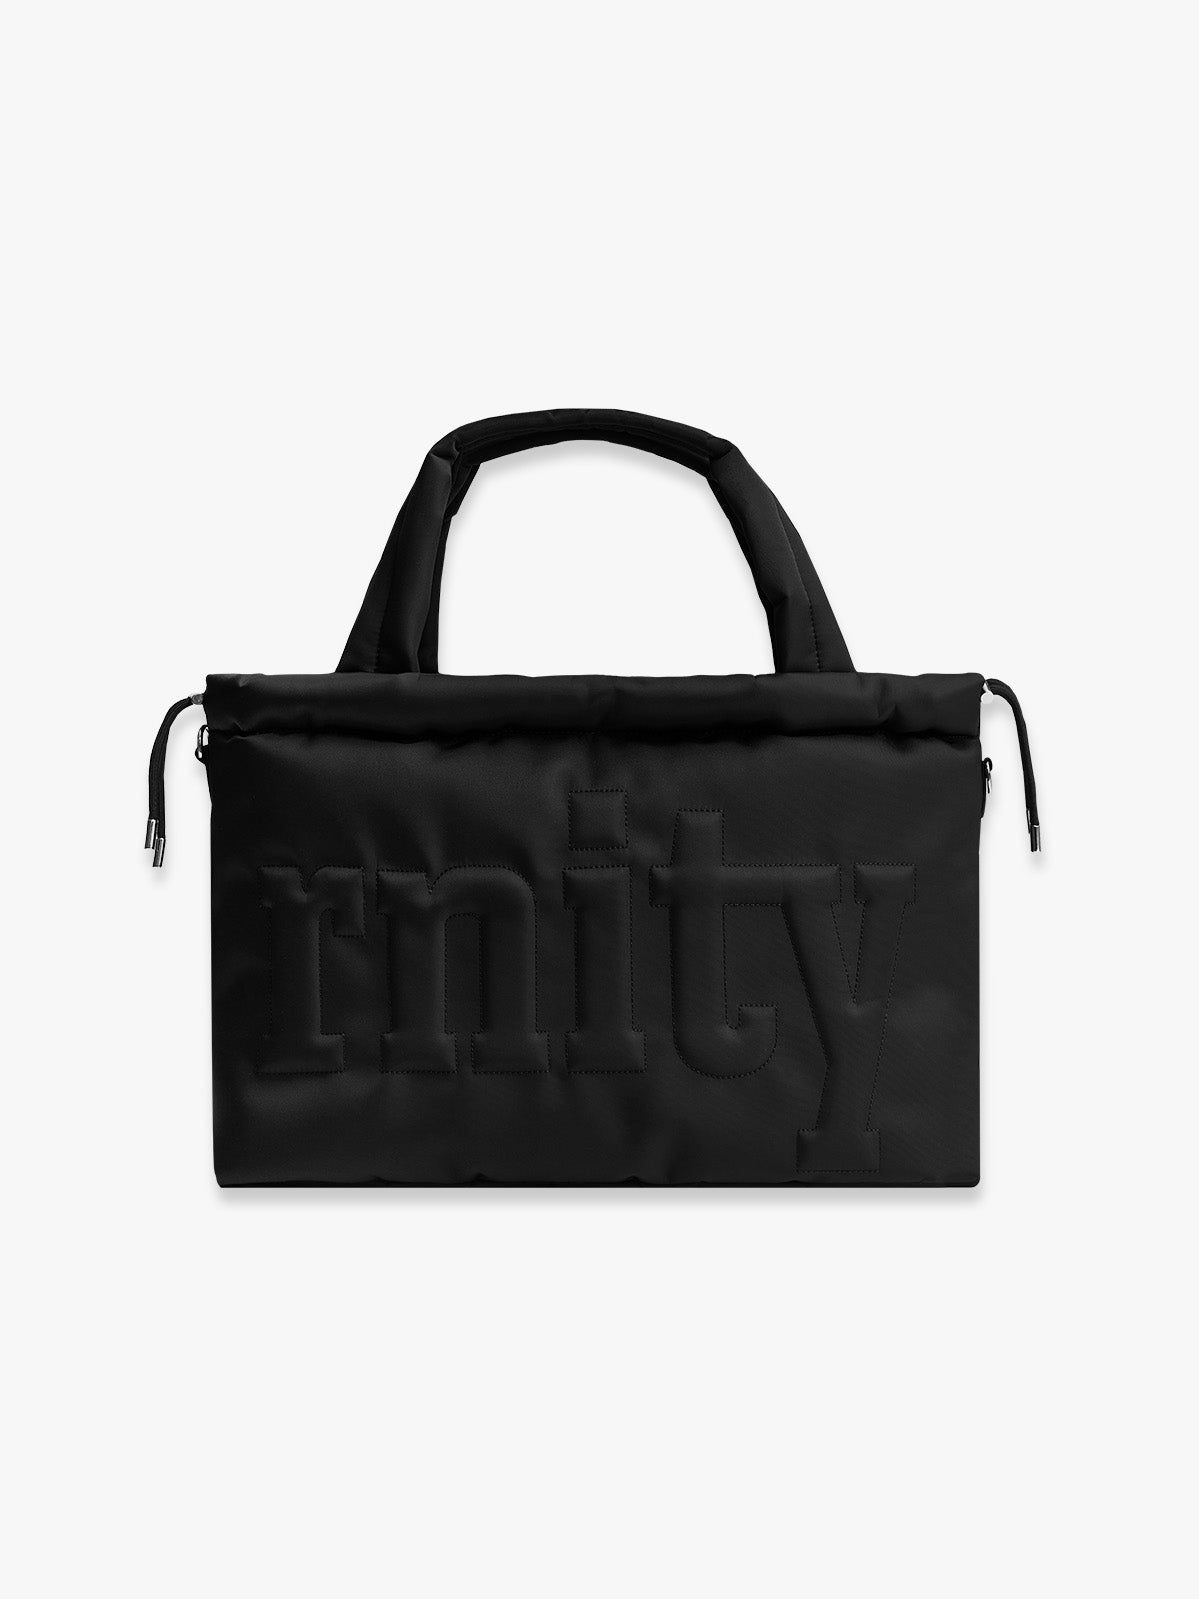 RETERNITY QUILTED TOTE BAG - BLACK